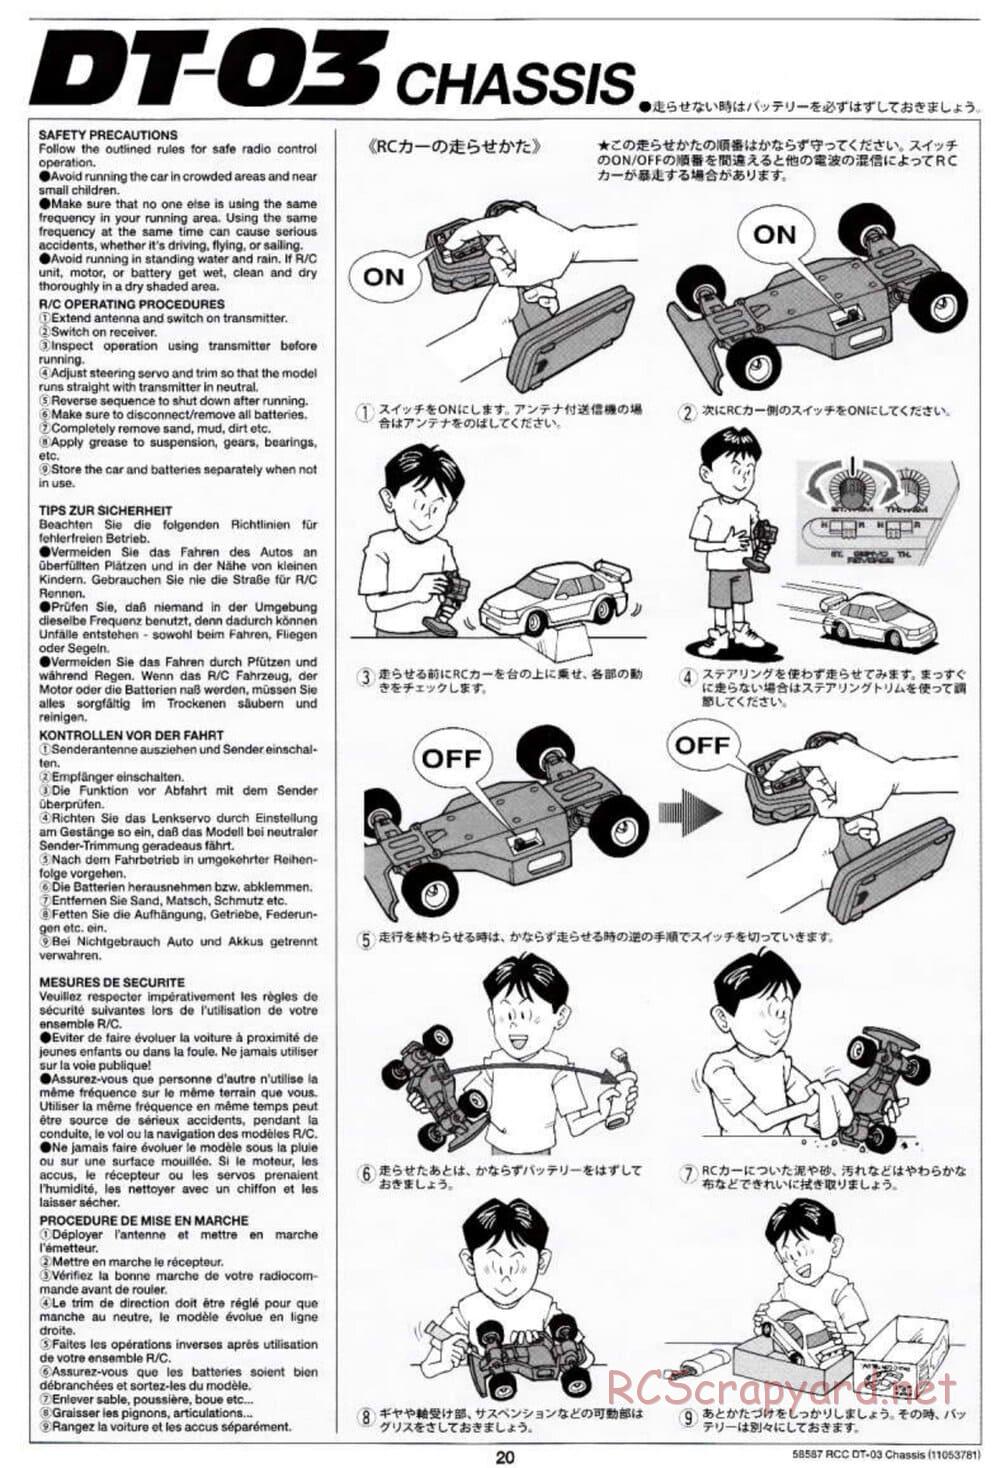 Tamiya - Neo Fighter Buggy Chassis - Manual - Page 20